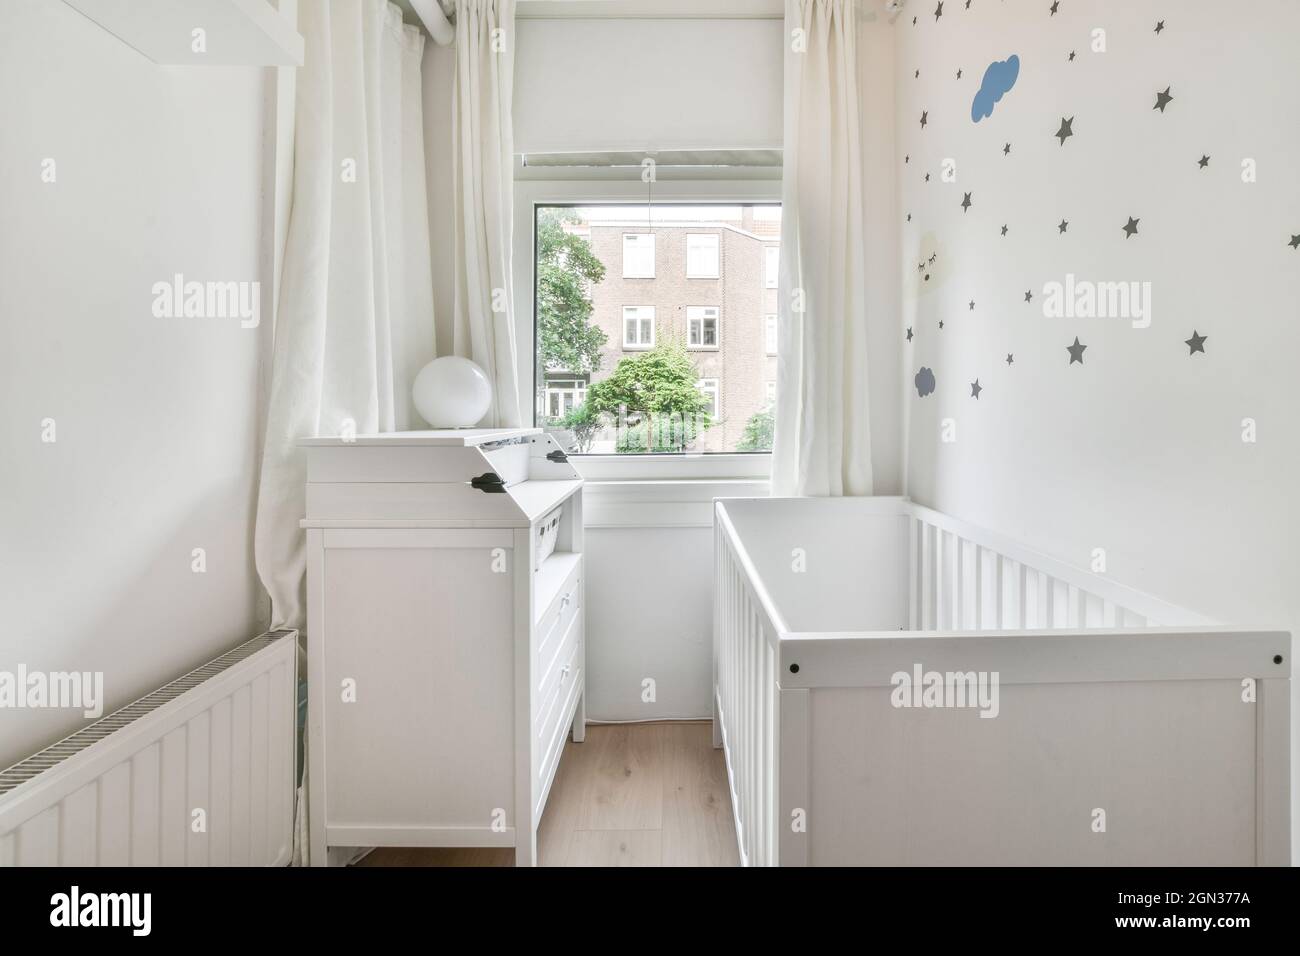 Small wooden baby cot placed near window in bedroom with minimalistic interior in daytime Stock Photo